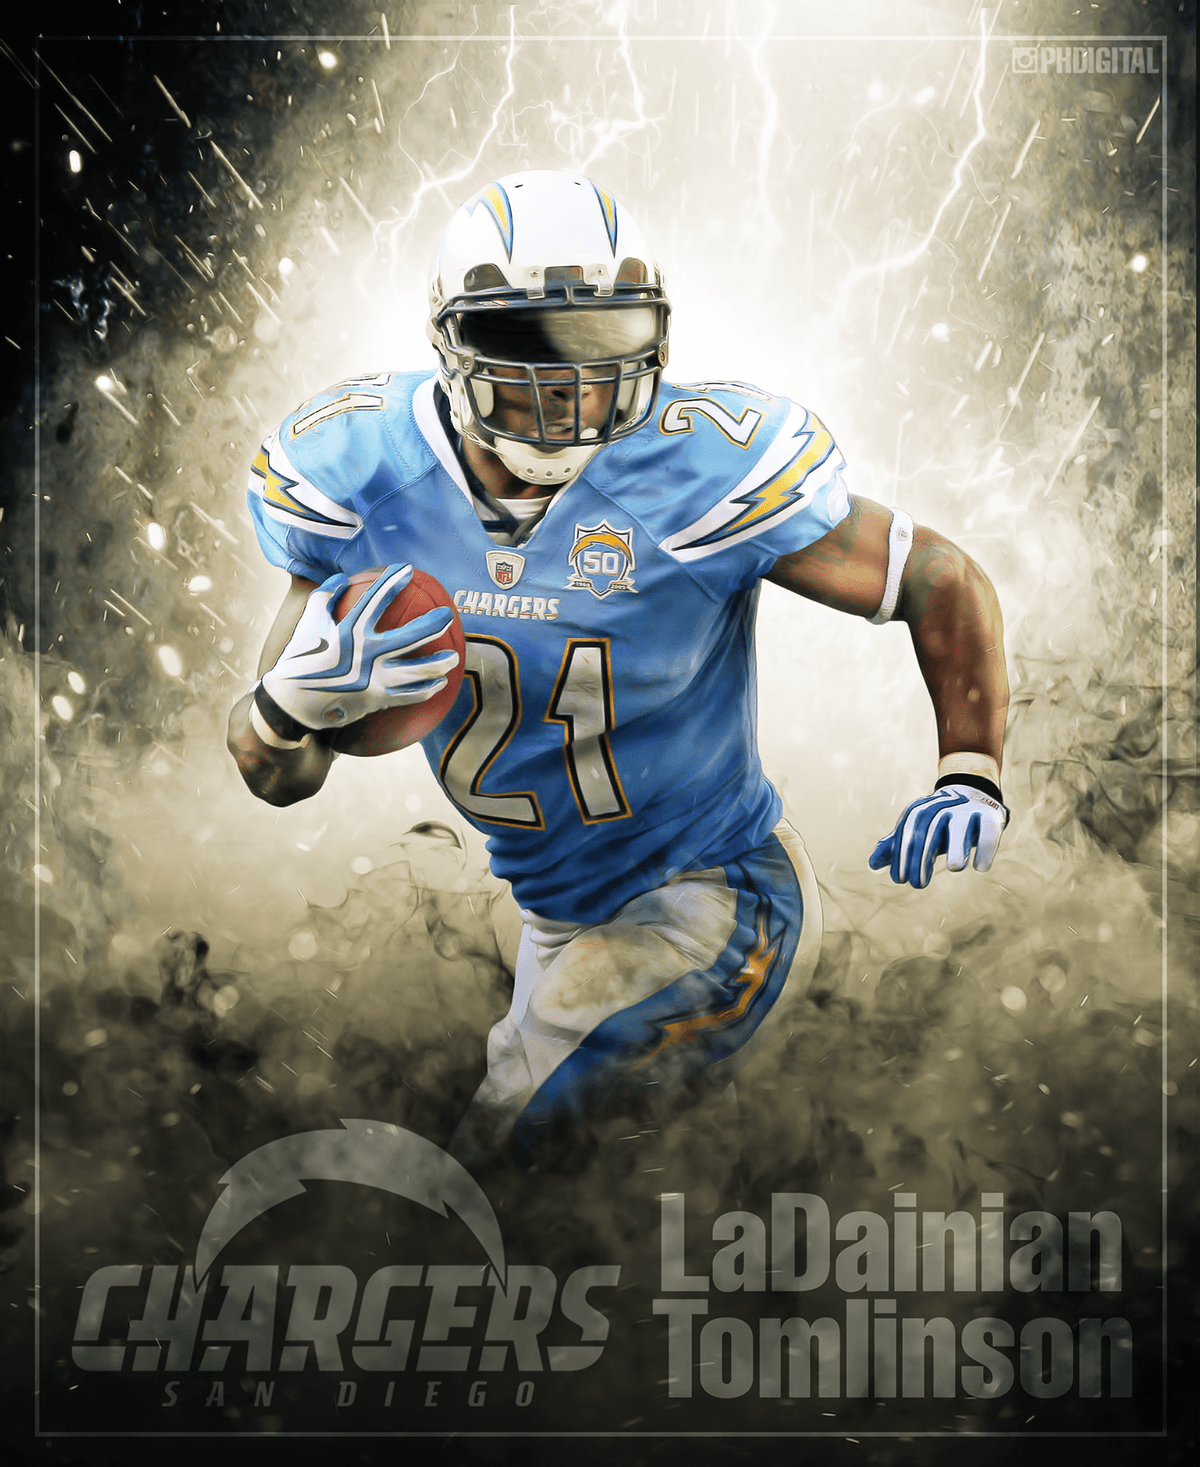 San Diego Chargers LaDainian Tomlinson Poster